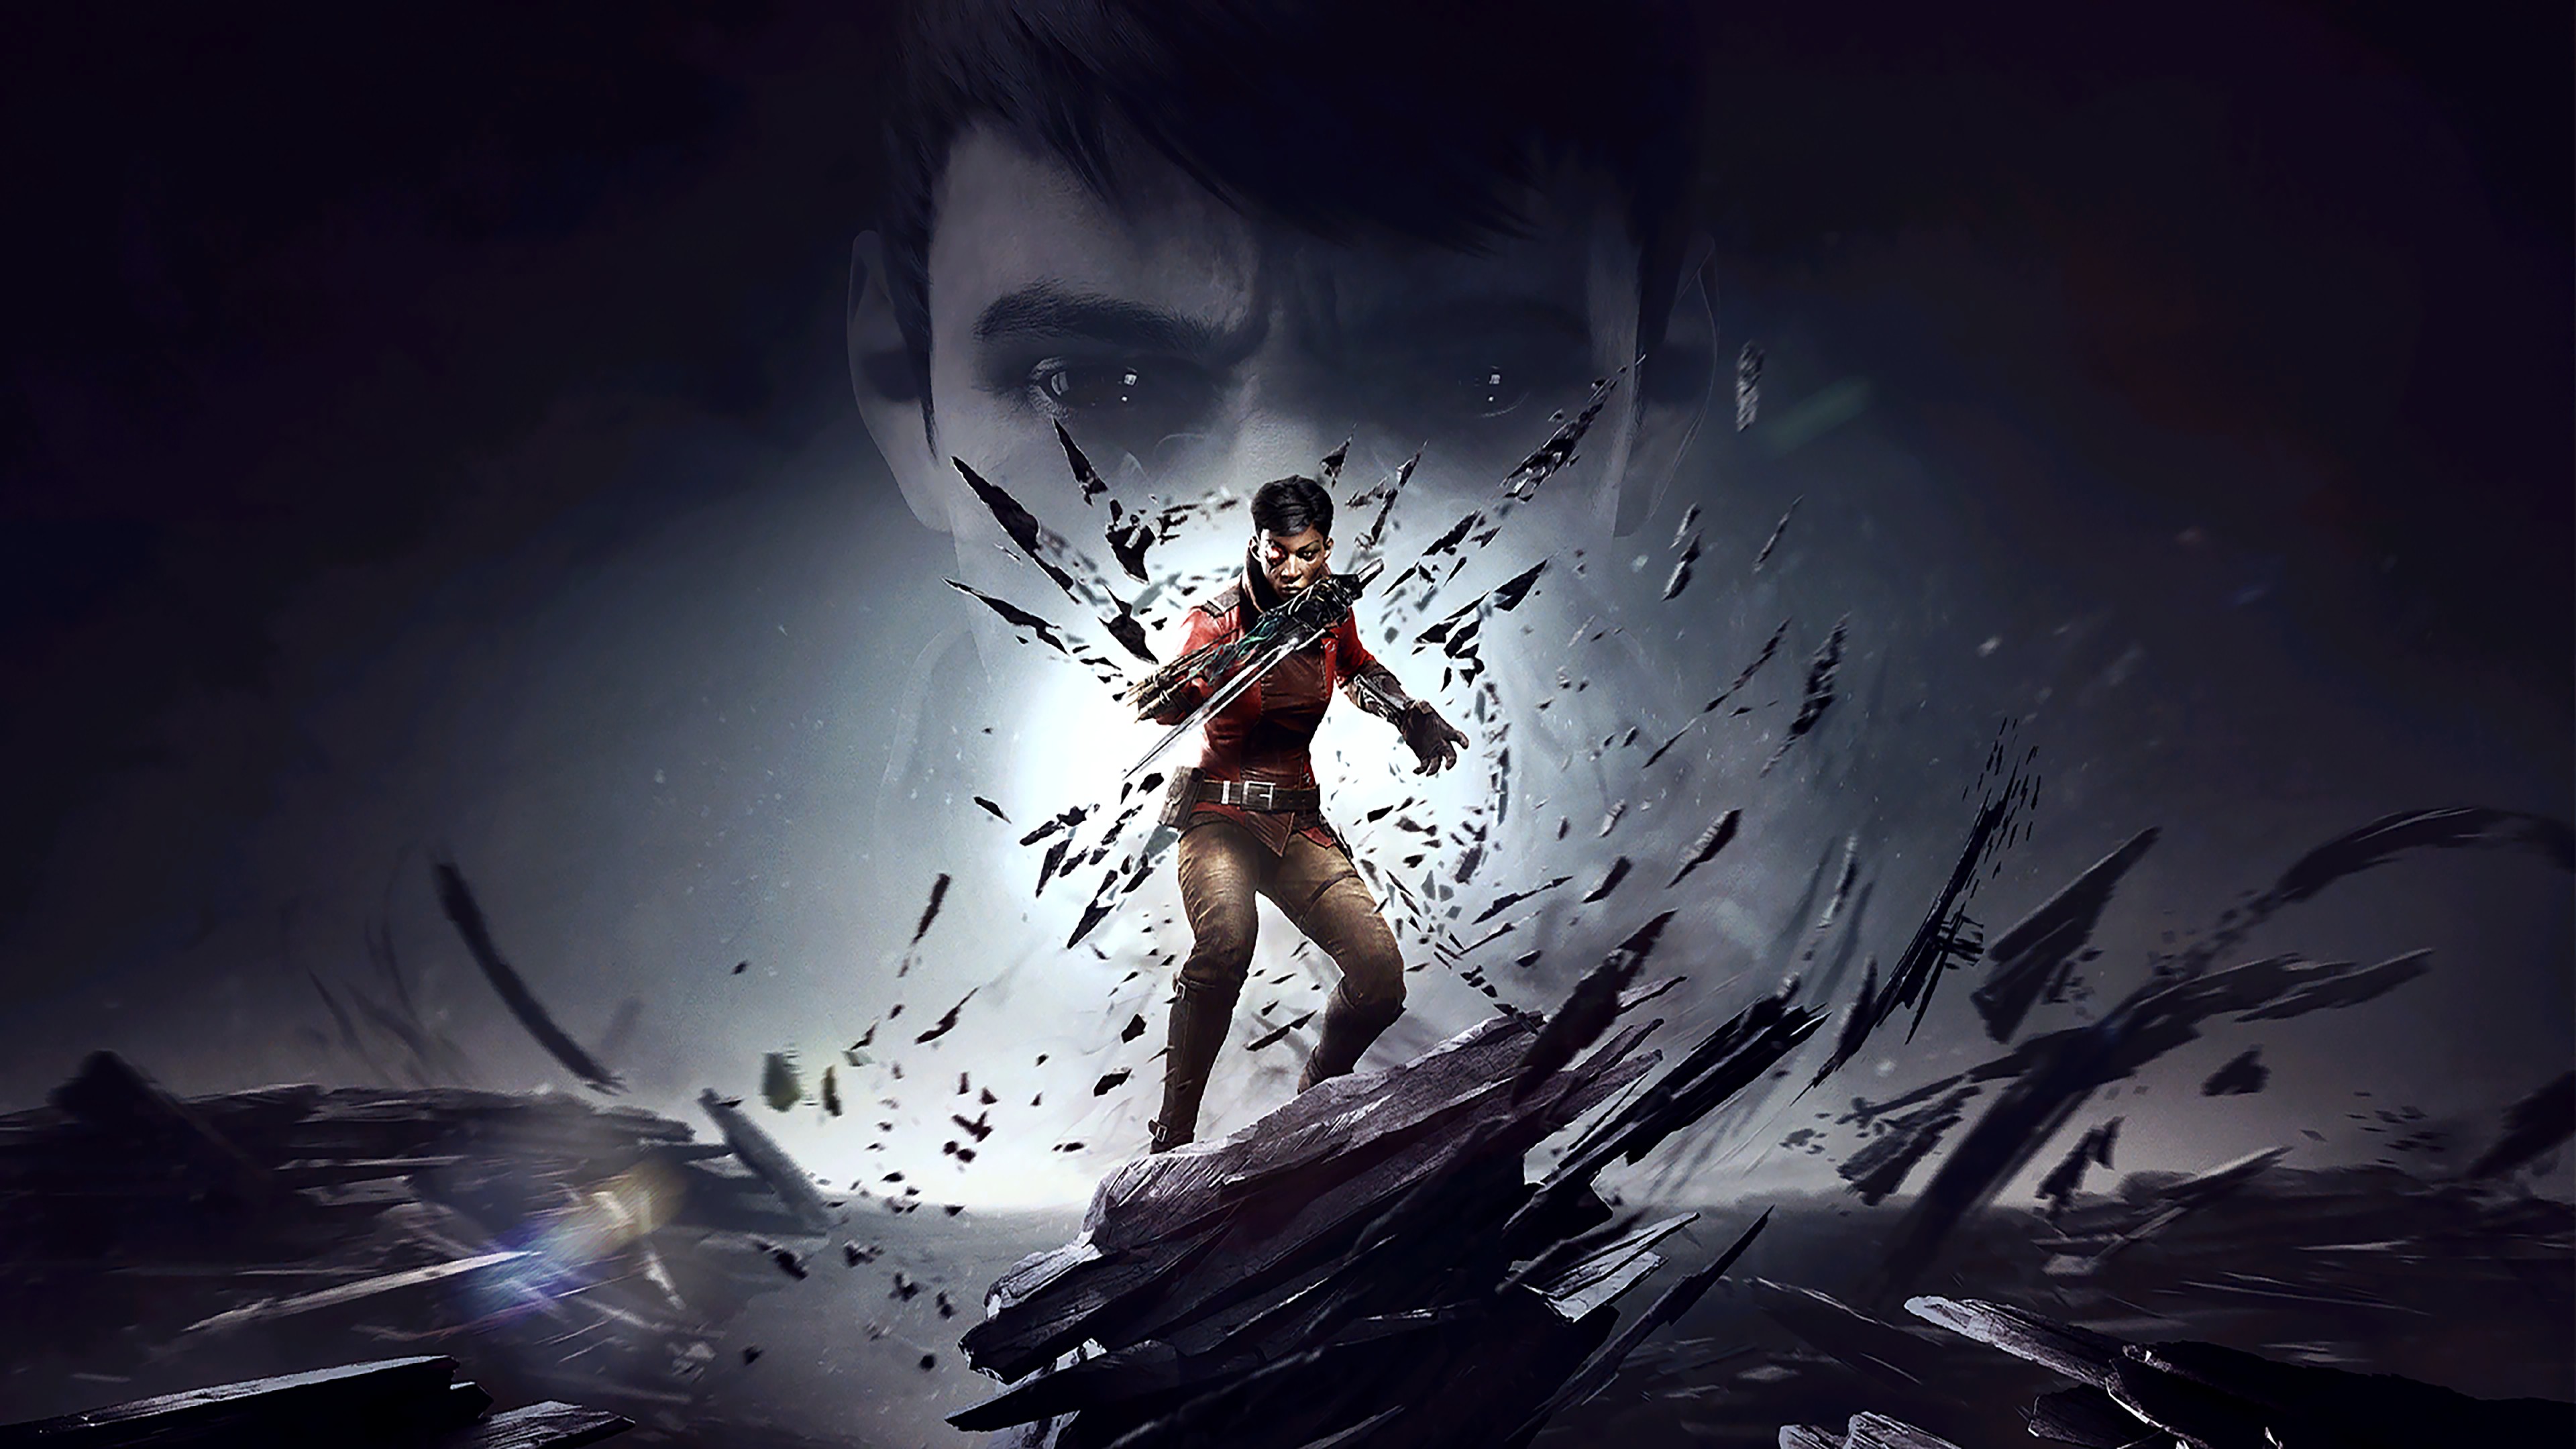 Meagan Foster, Billie Lurk, Dishonored 2, Dishonored: Death of the Outsider, Video games, Dishonored Wallpaper